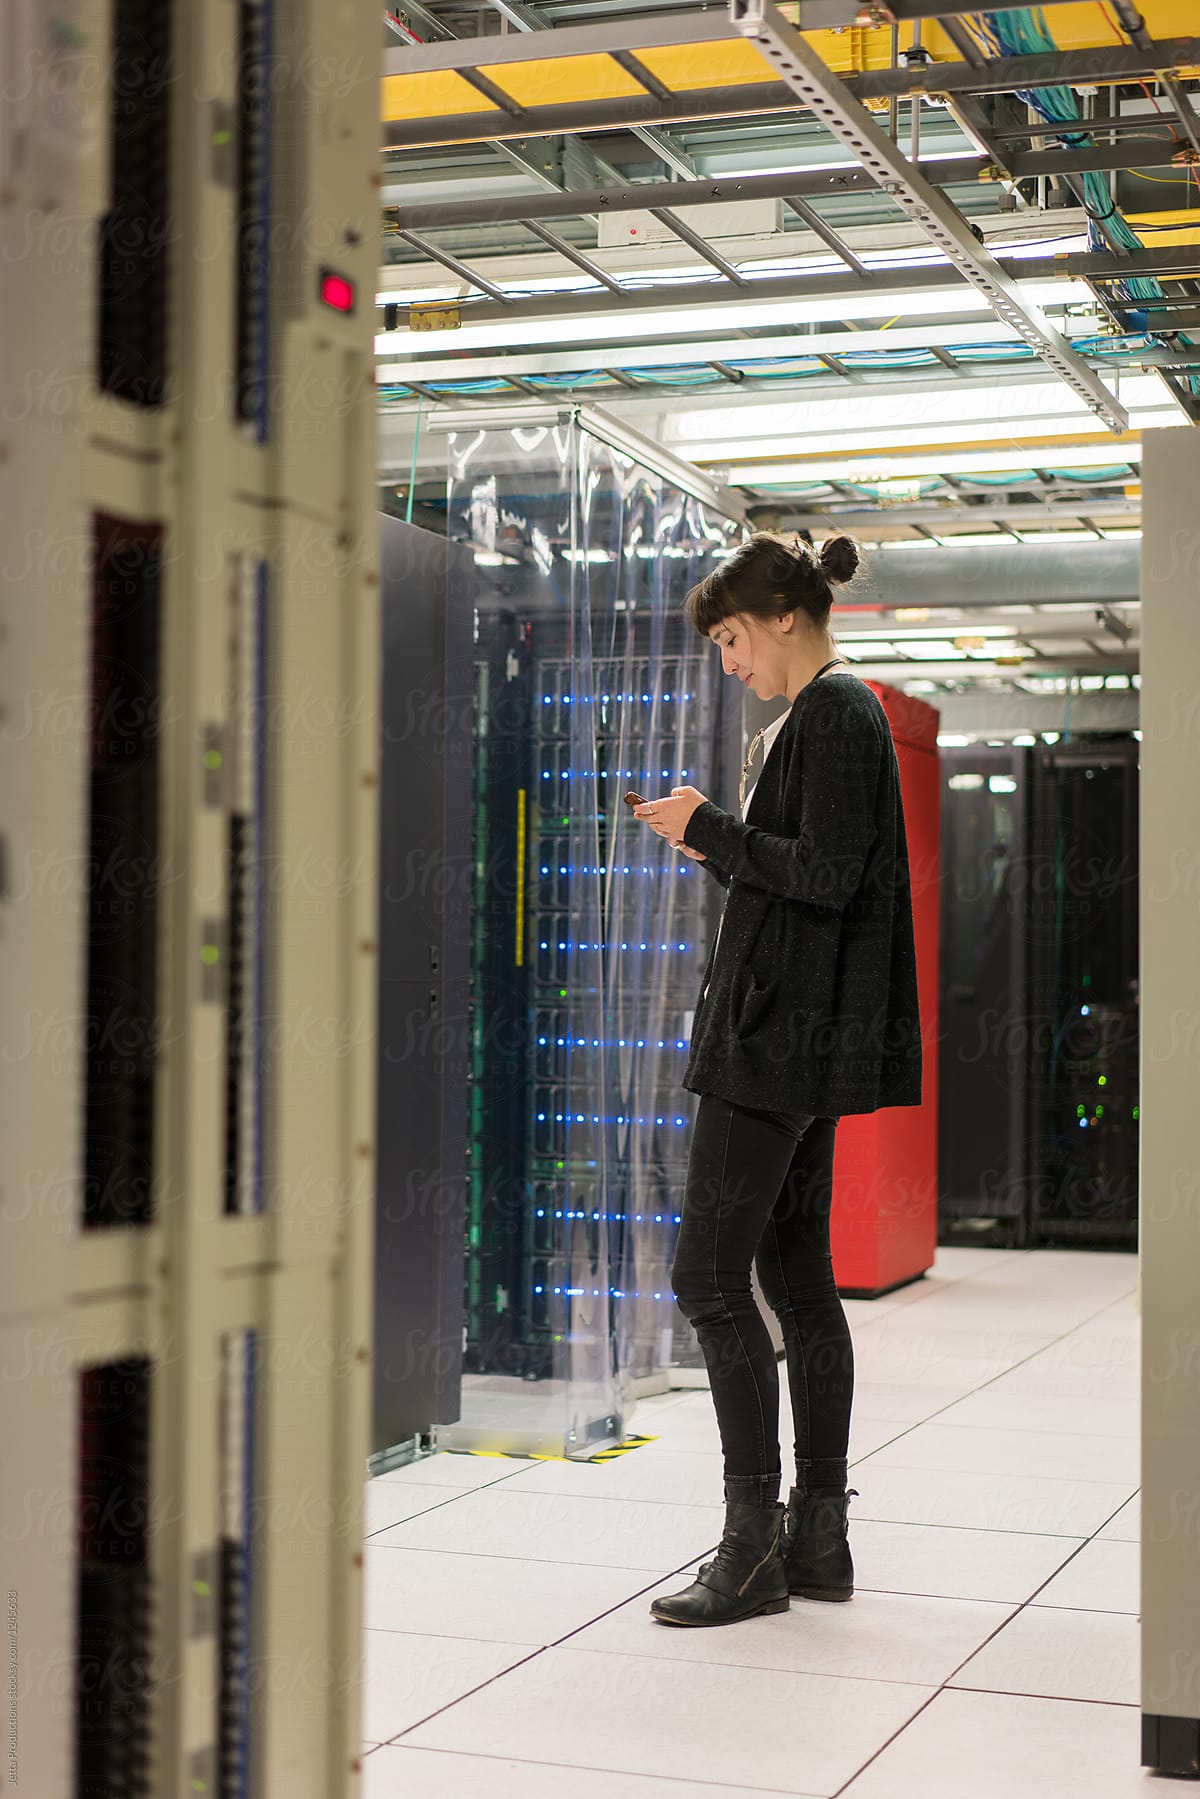 Technician stands in a server room while reading her cellphone